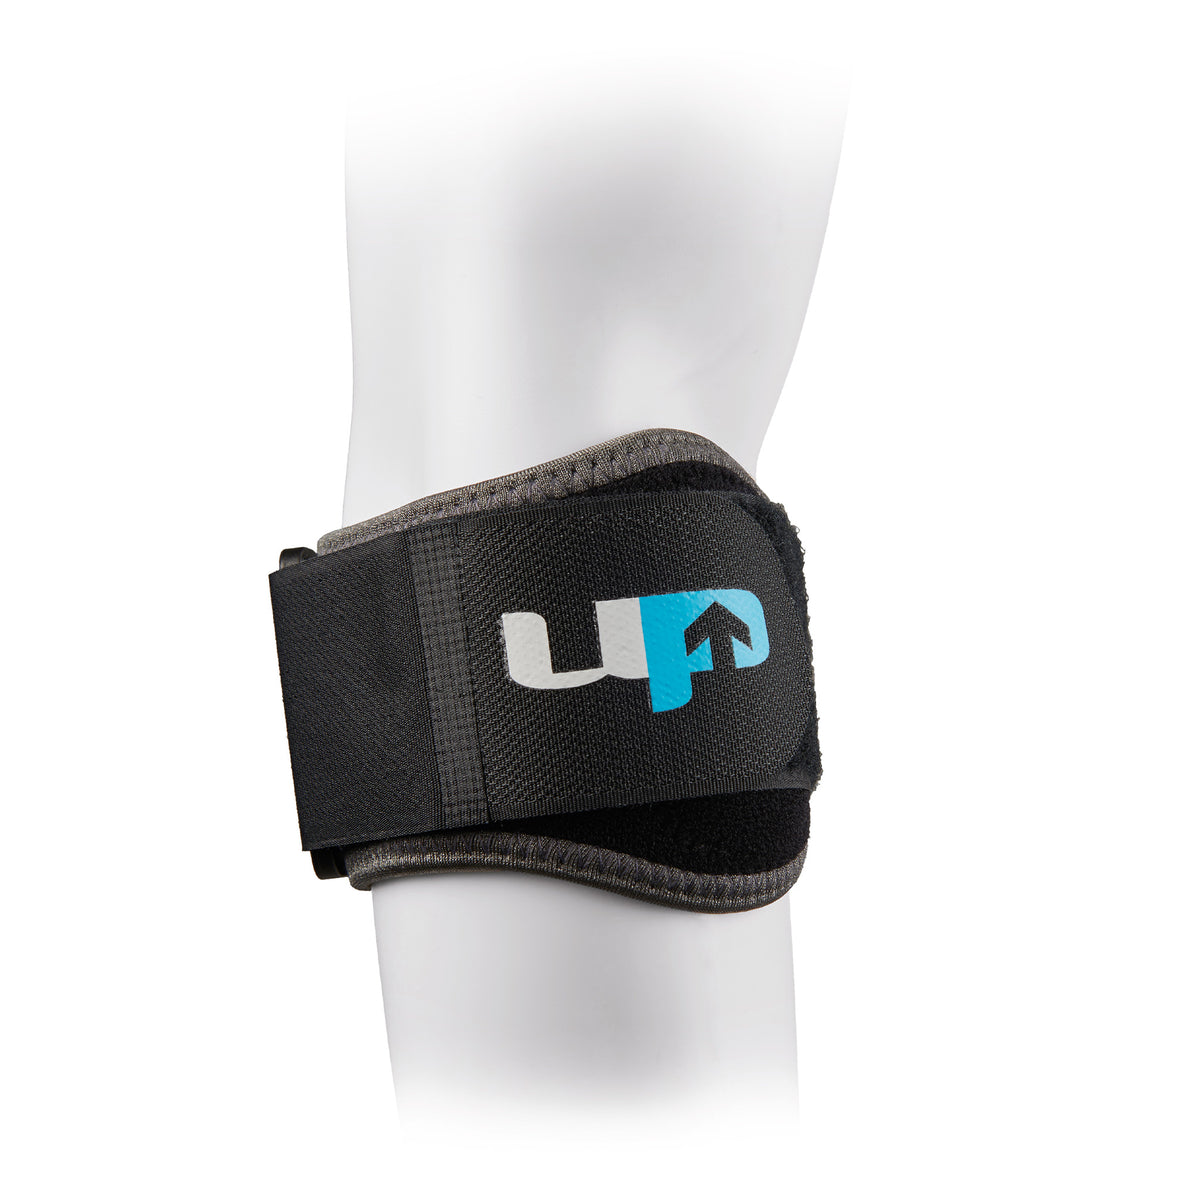 Ultimate Performance Tennis Elbow Support - One Size